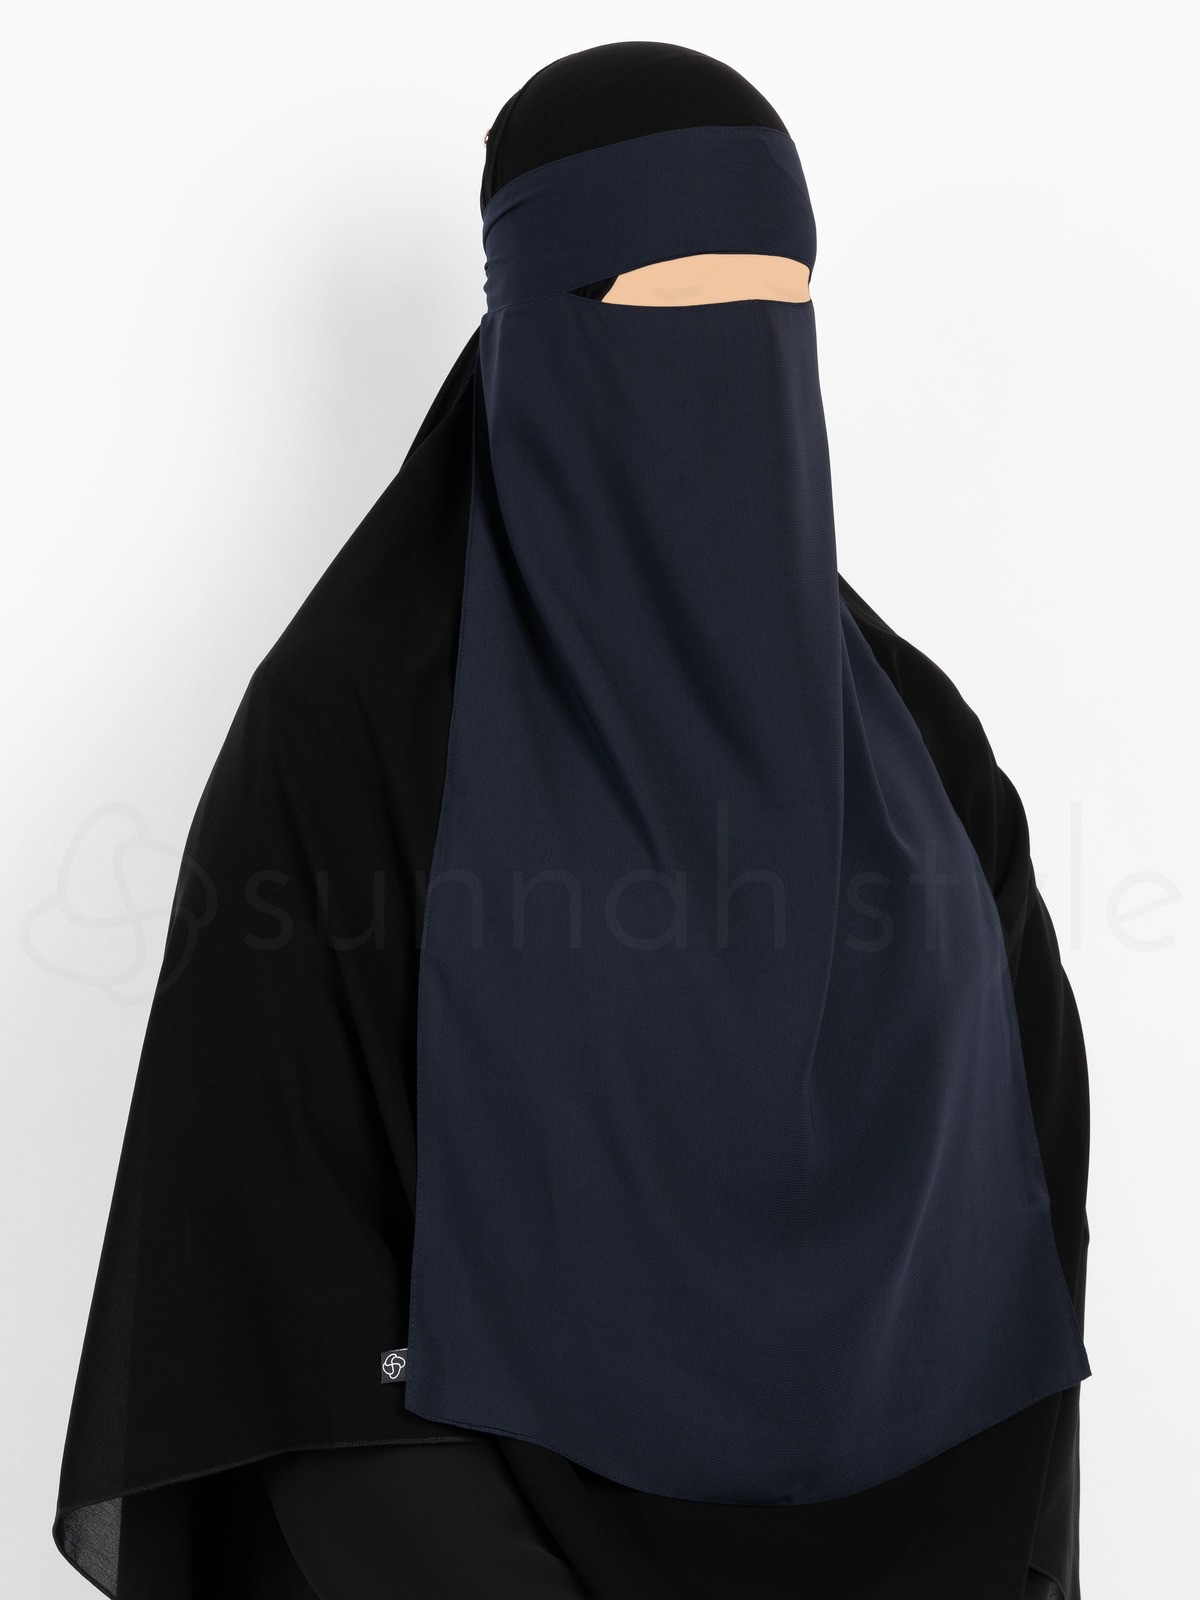 Sunnah Style - Long One Layer Niqab (Navy Blue)